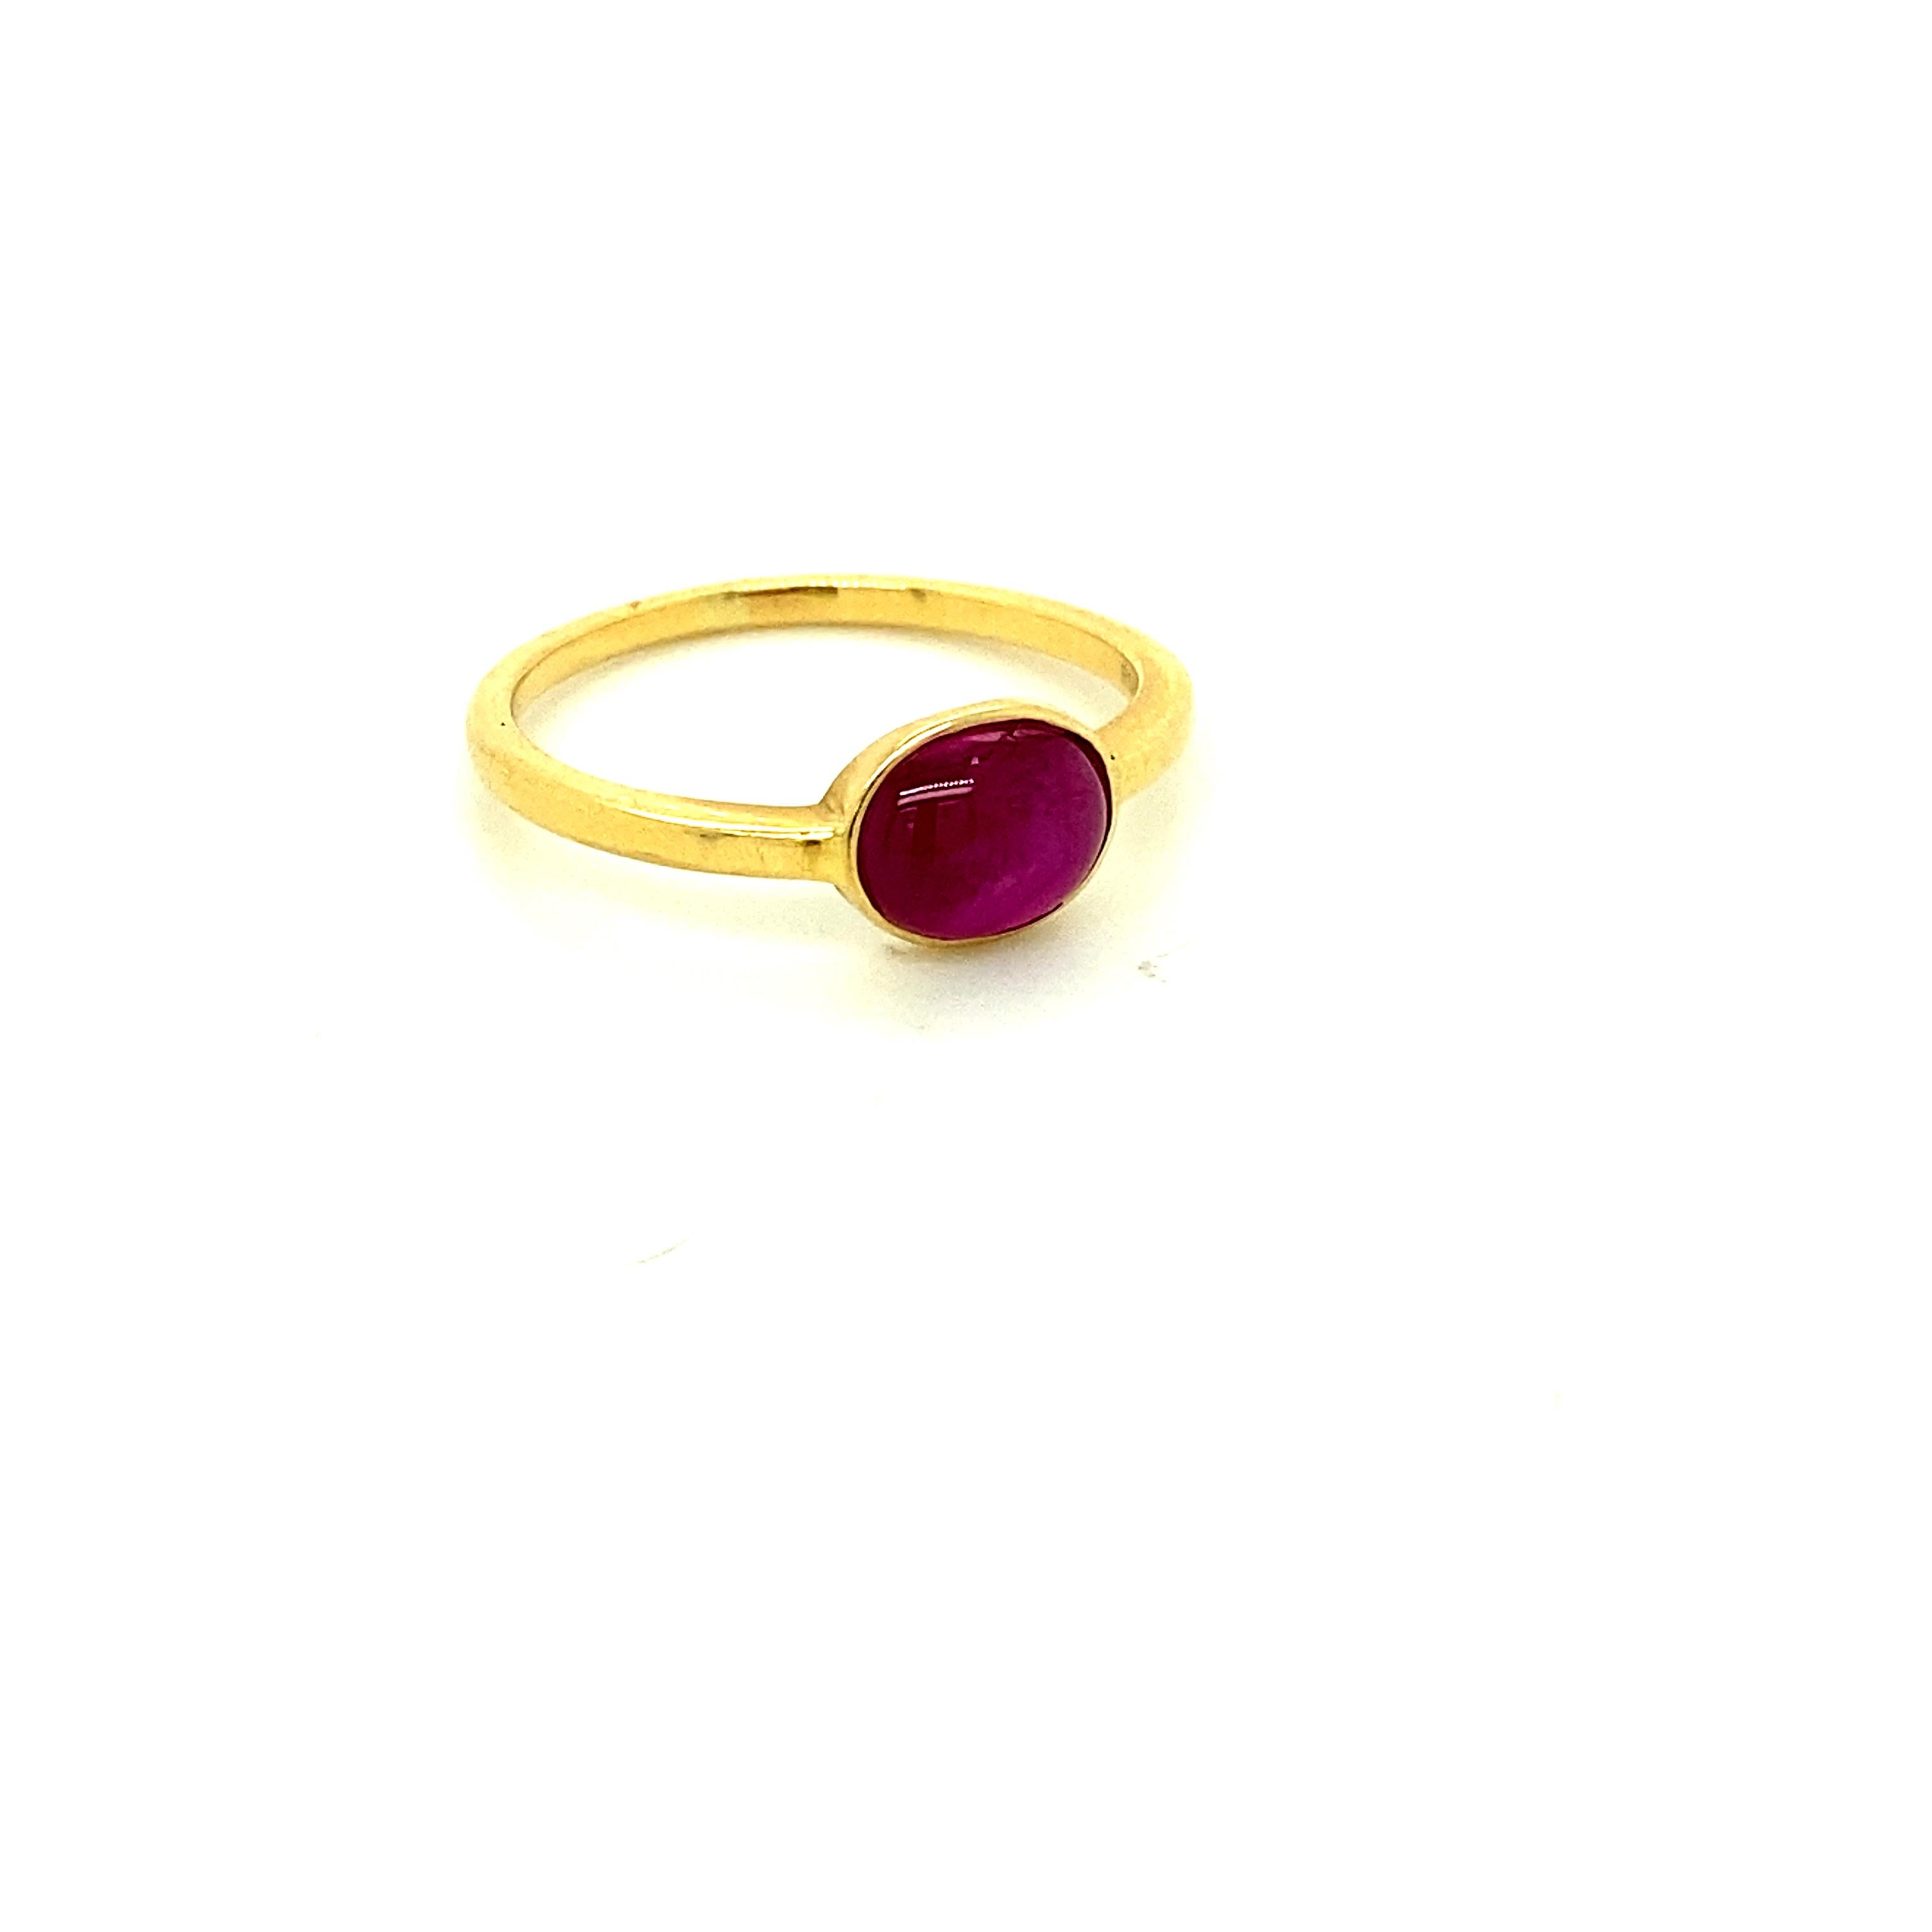 1.86 Carat Unheated Burmese Star Ruby Yellow Gold Engagement Ring:

A rare and unique ring, it features a stunning top quality unheated Burmese star ruby weighing 1.86 carat. The star ruby, hailing from Burma, is completely natural and without any